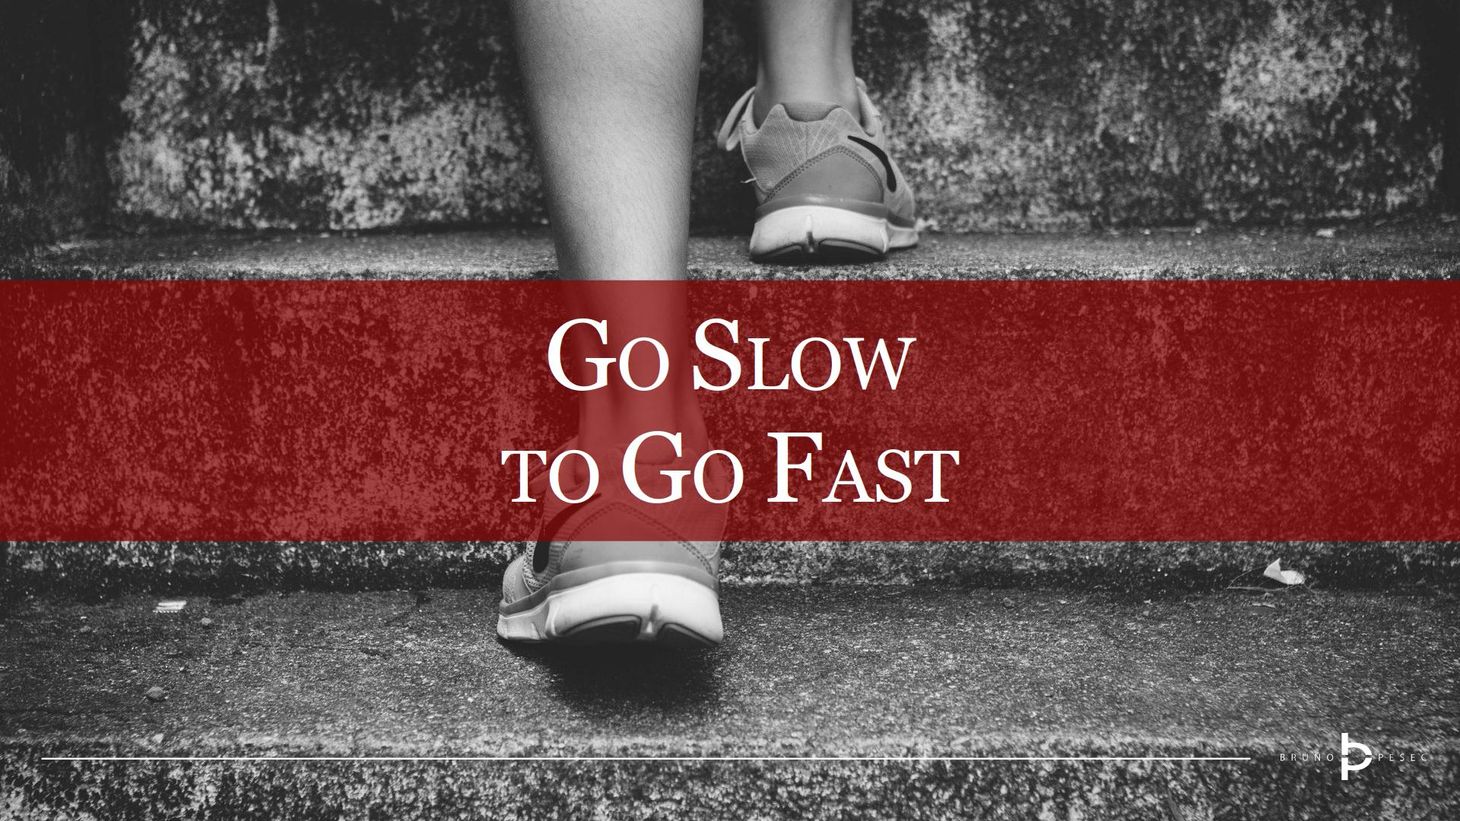 Go slow to go fast